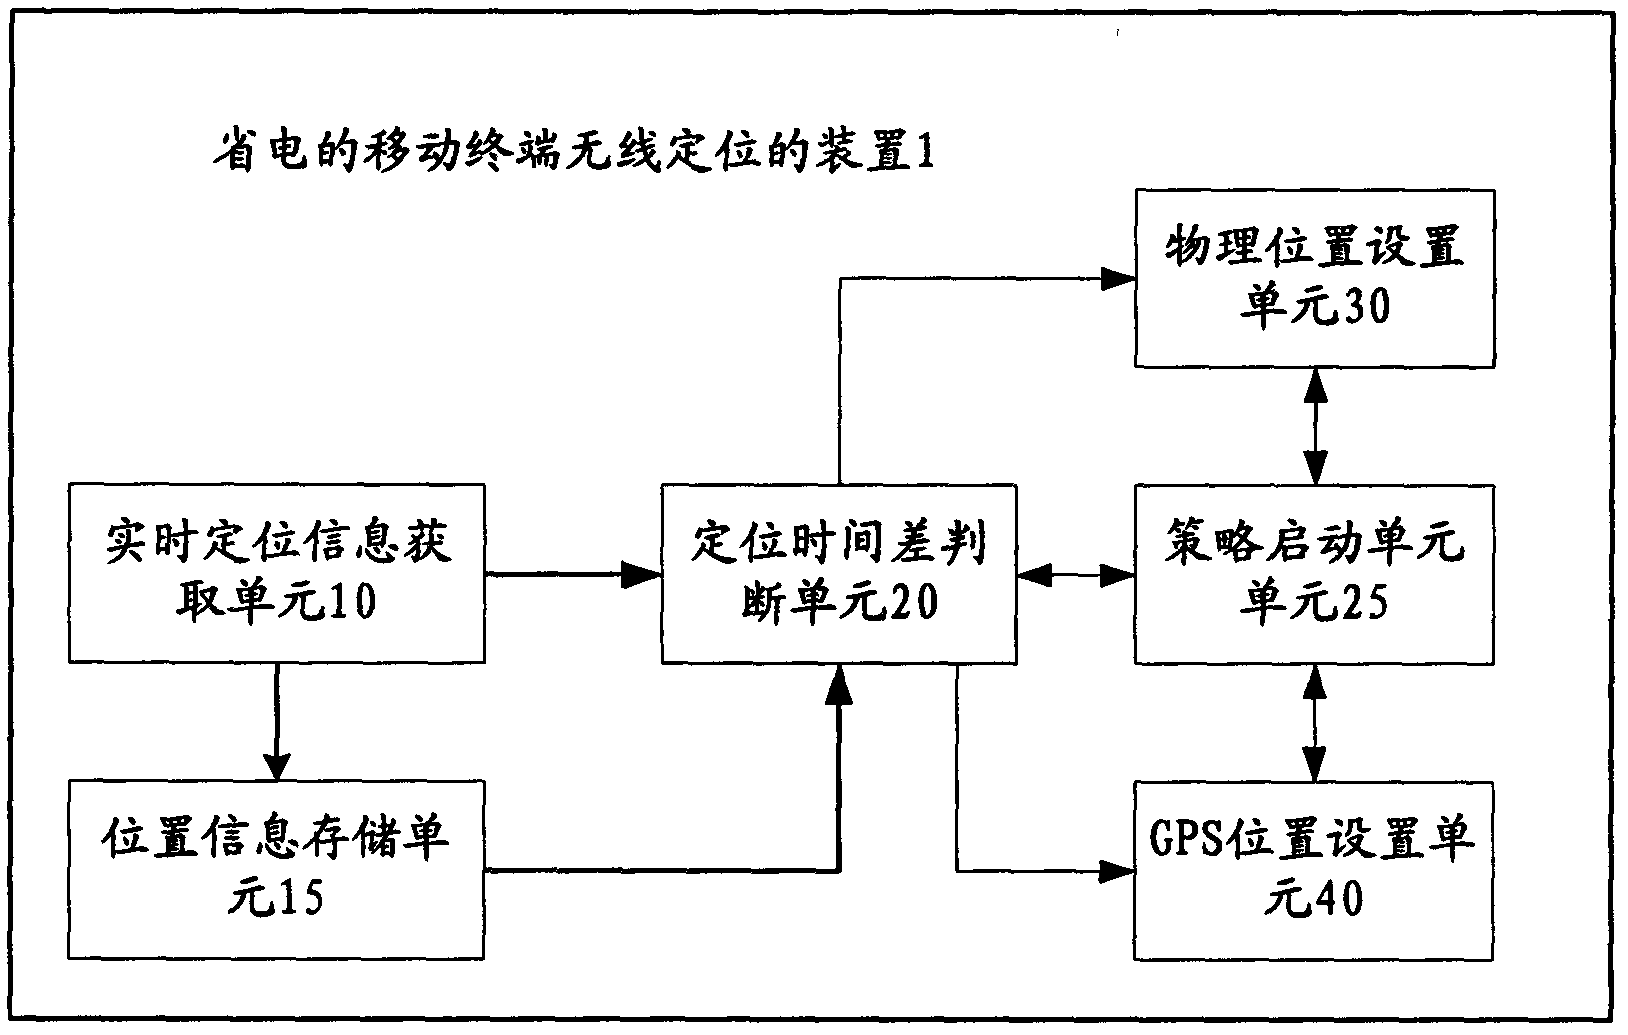 Power-saving wireless positioning method, device and system for mobile terminal